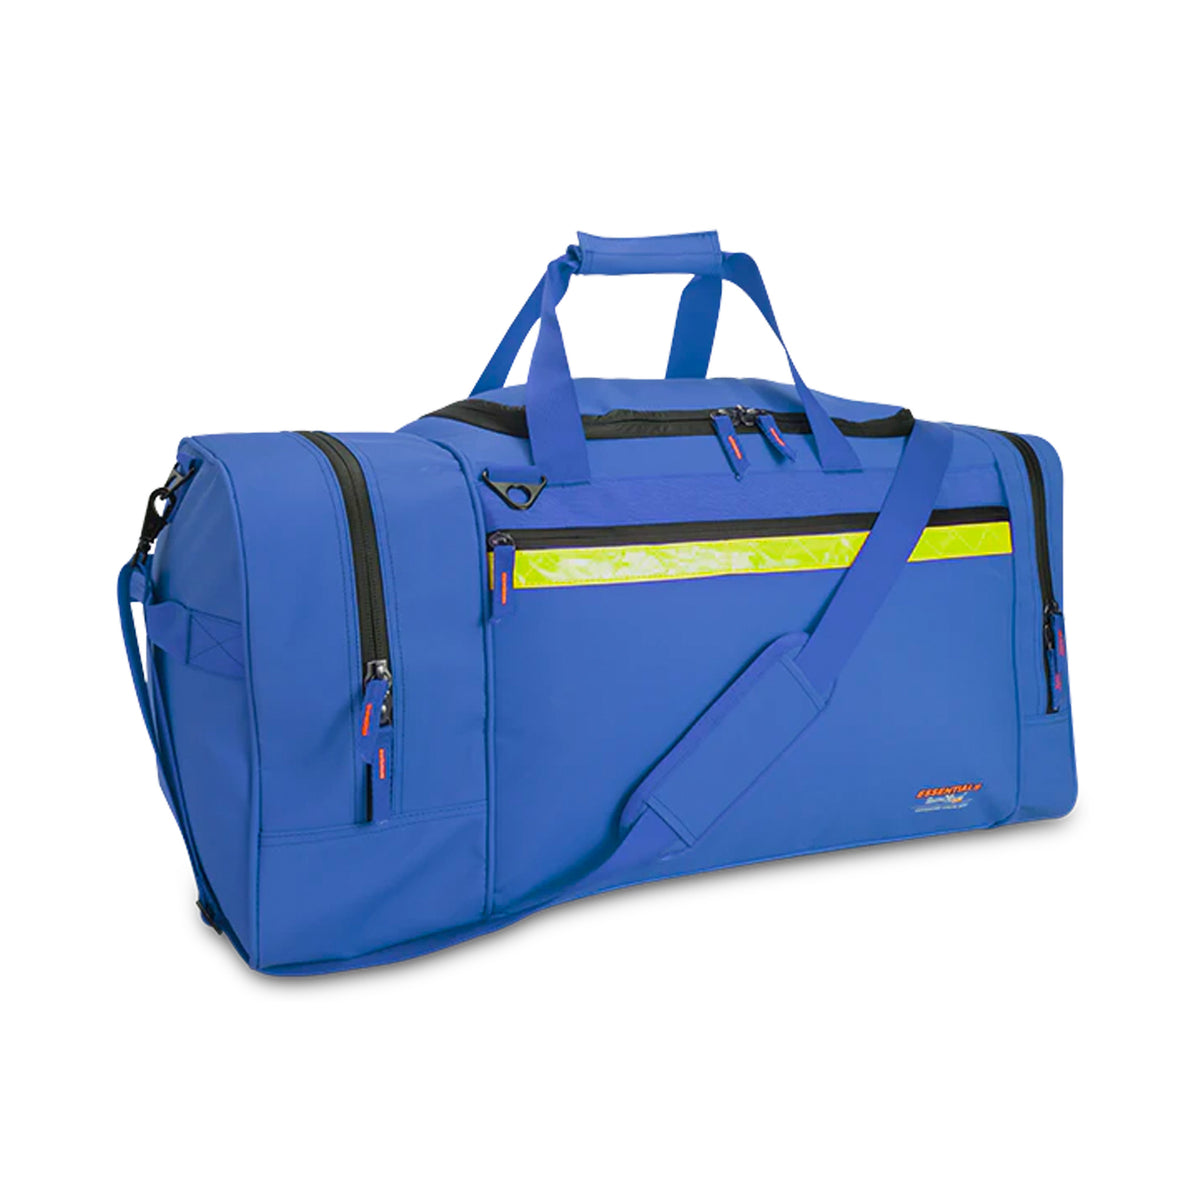 rugged xtremes offshore crew bag in blue